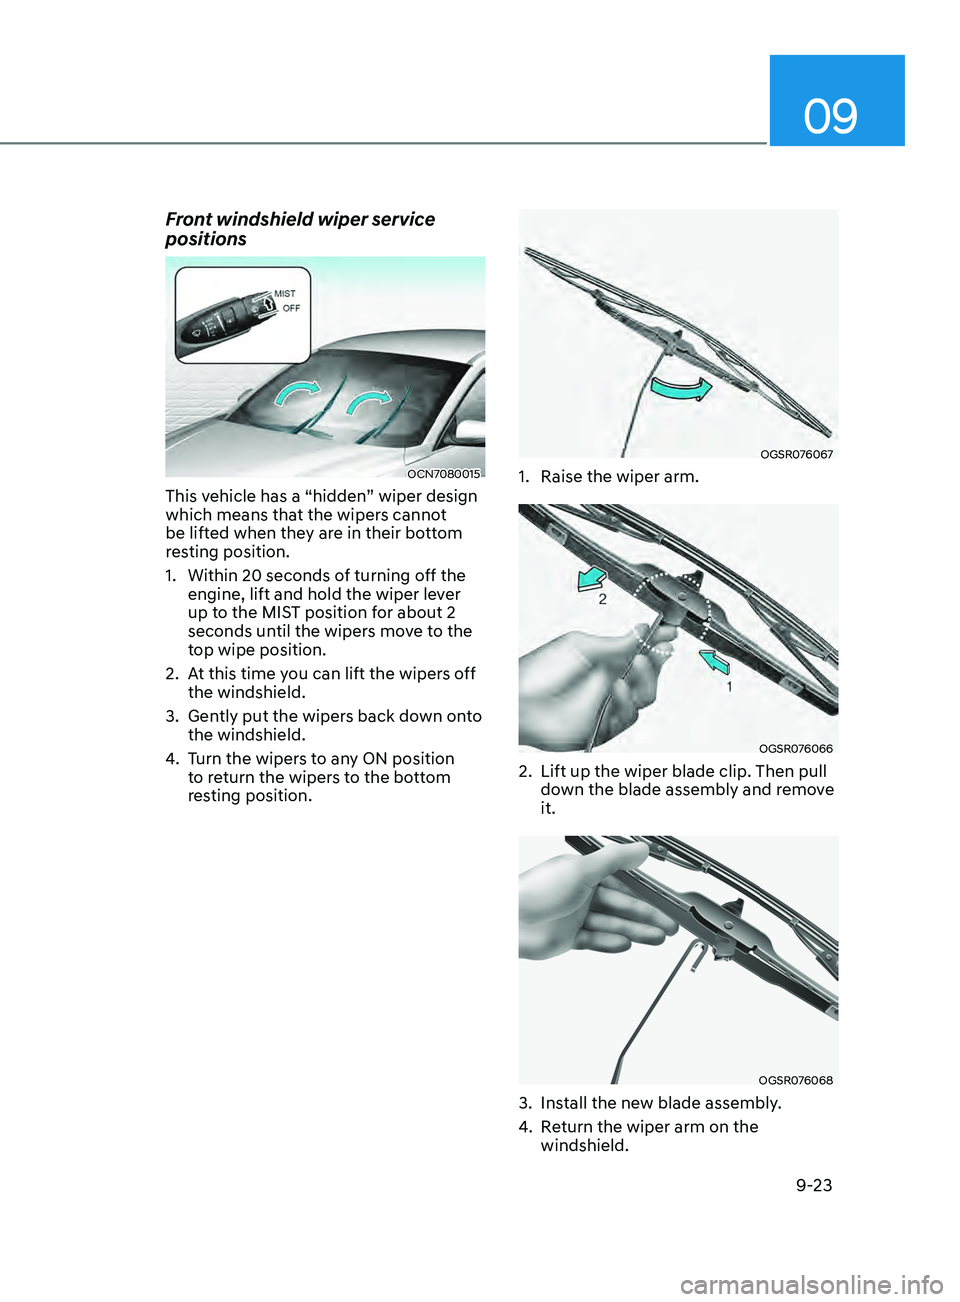 HYUNDAI ELANTRA 2021  Owners Manual 09
9-23
Front windshield wiper service 
positions
OCN7080015
This vehicle has a “hidden” wiper design 
which means that the wipers cannot 
be lifted when they are in their bottom 
resting position